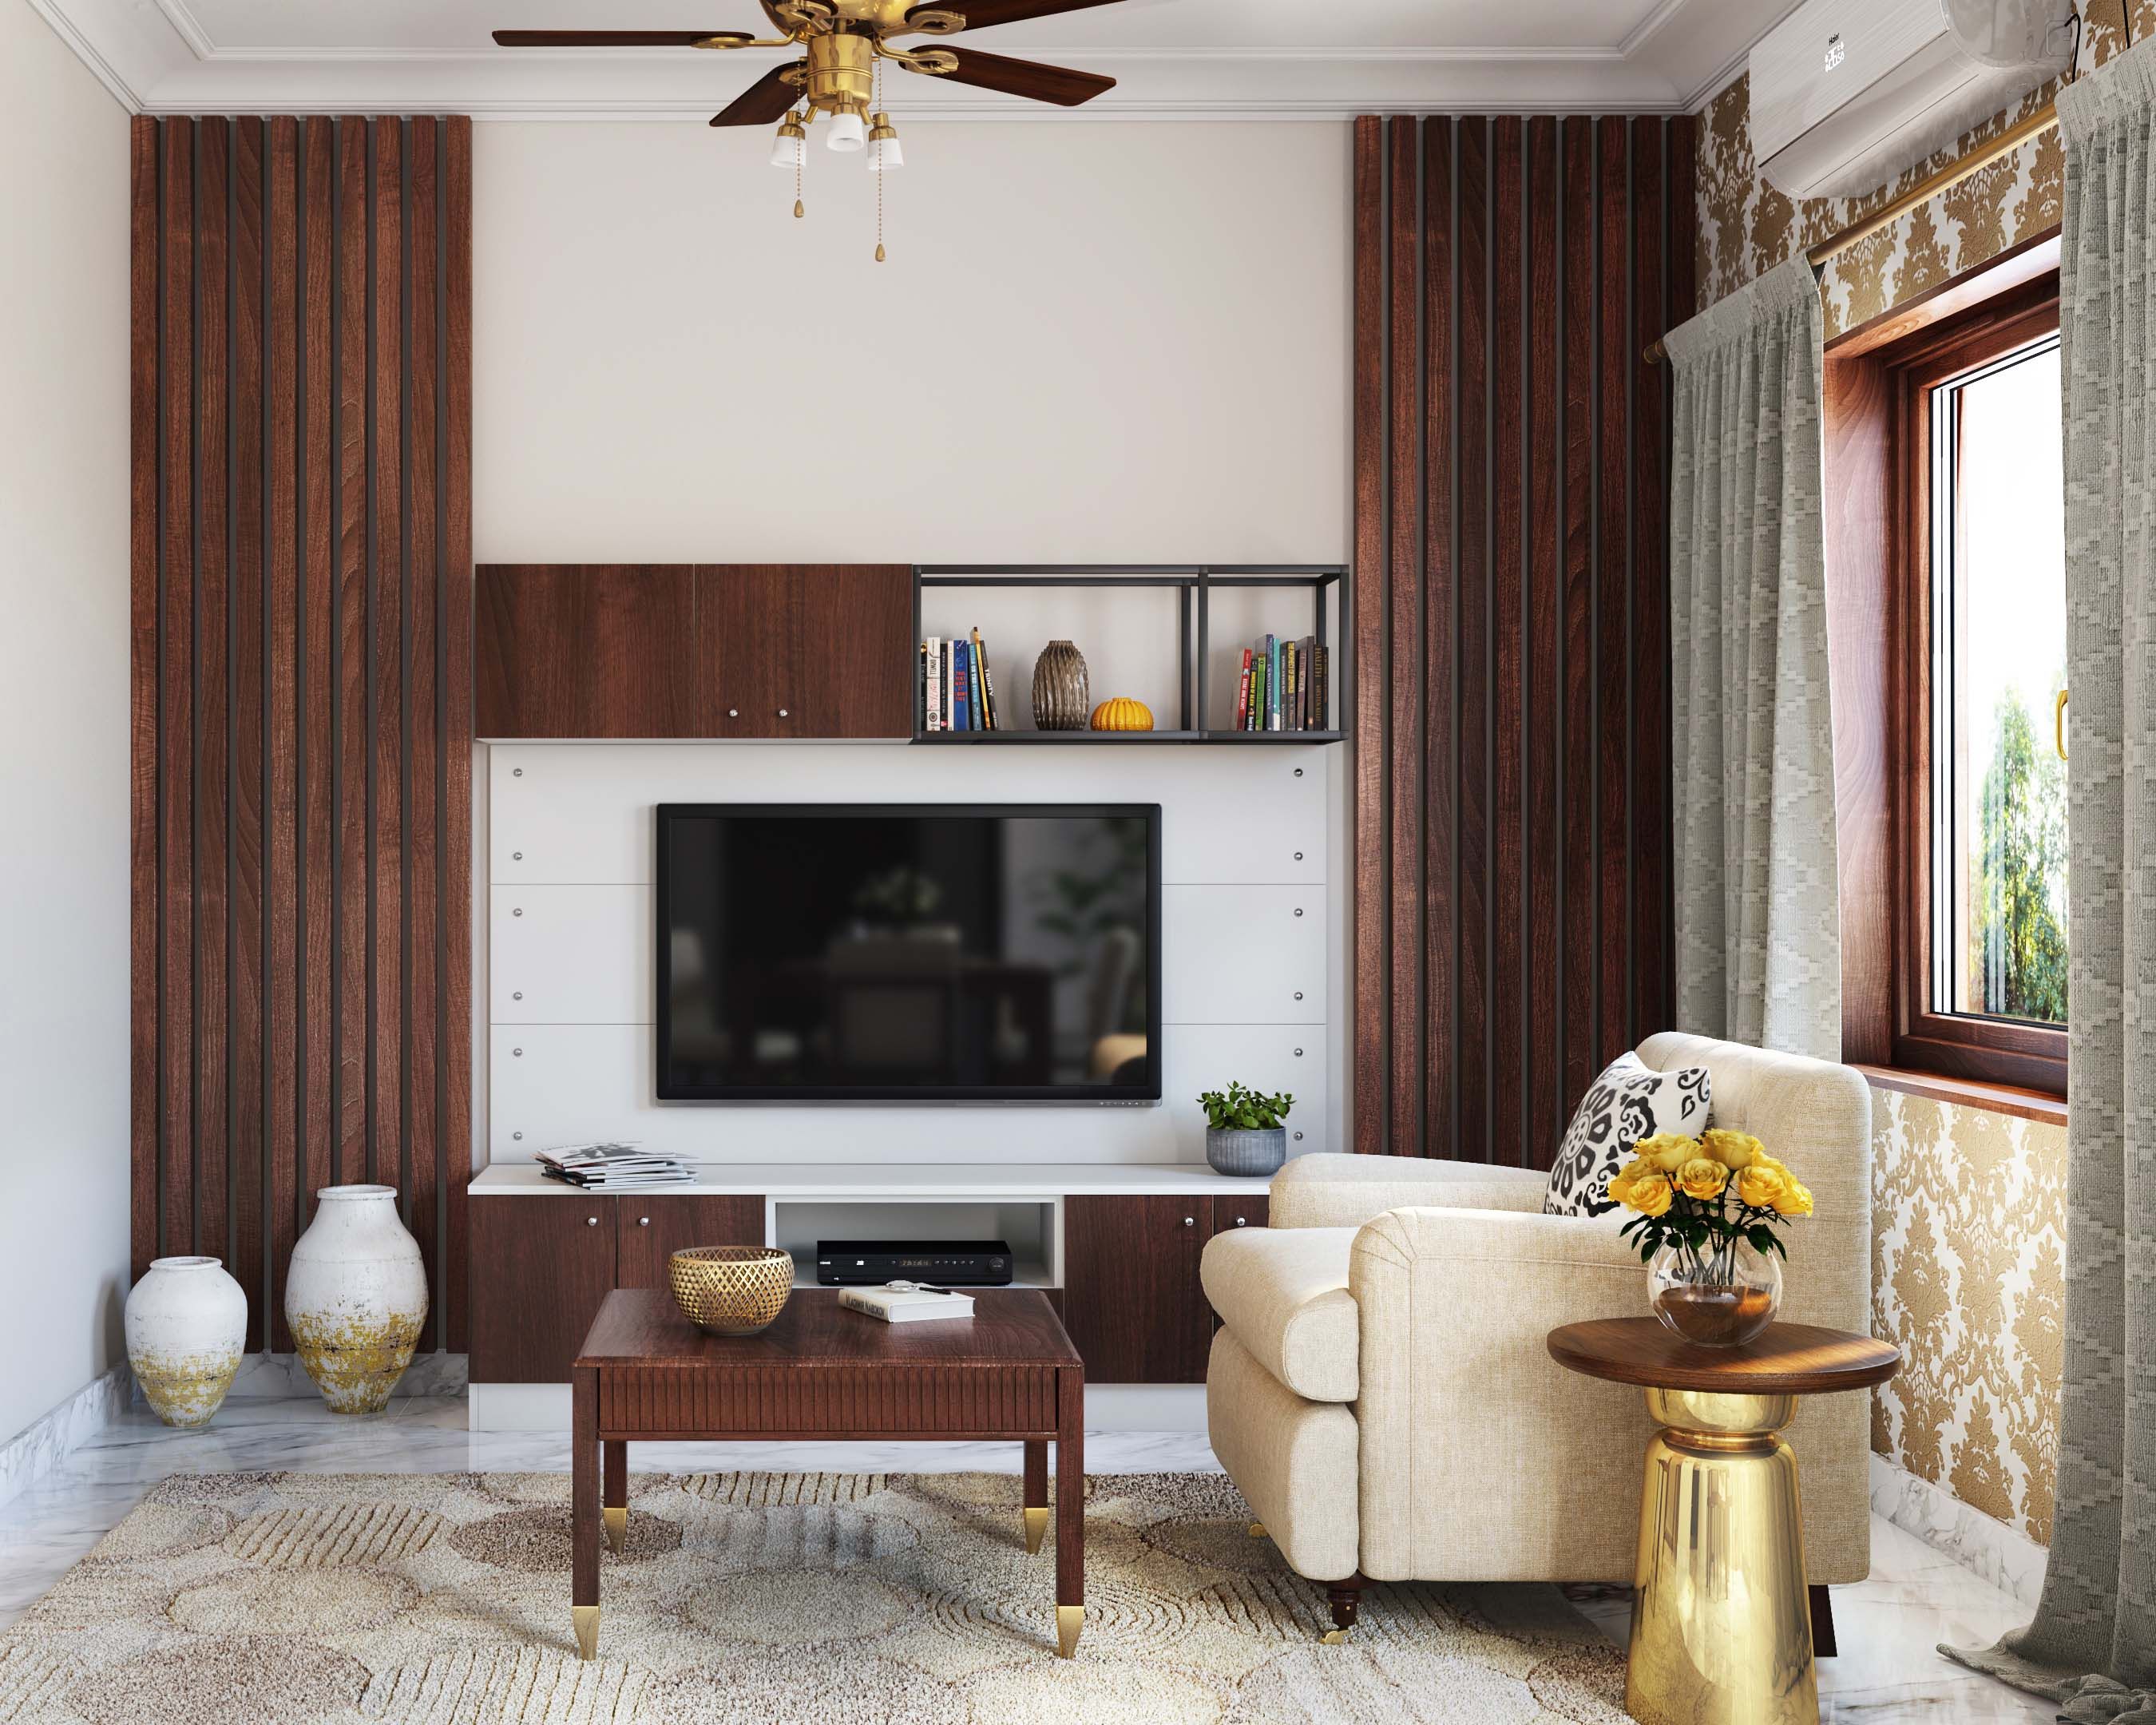 Modern Floor-Mounted Wood And White TV Unit Design With Wooden Wall Panelling